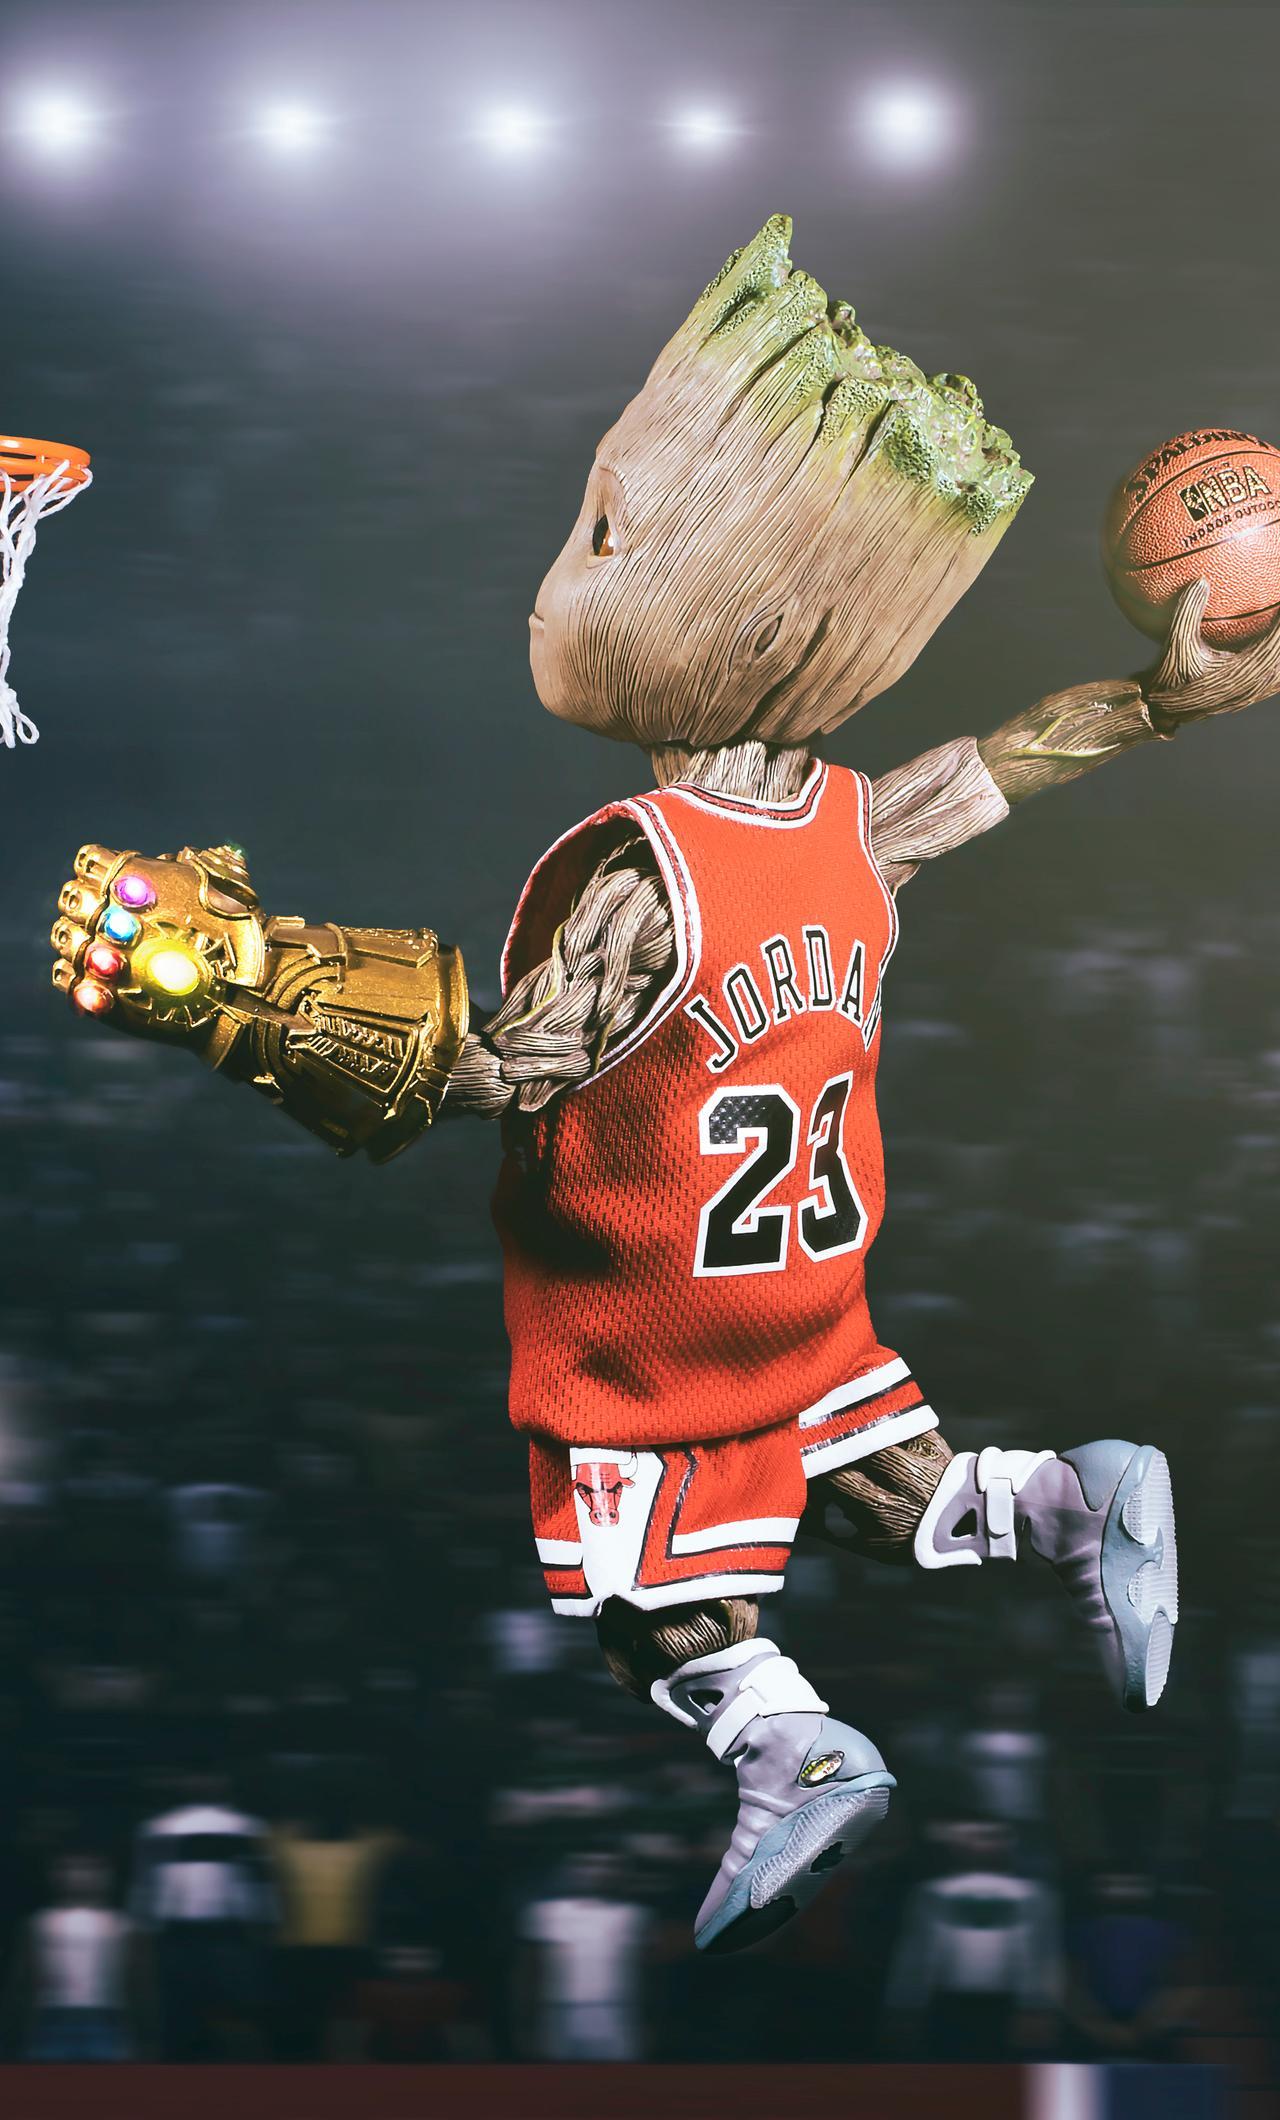 Basketball Drippy Wallpapers : Drip Drips Rainbow Drippy Wallpapers